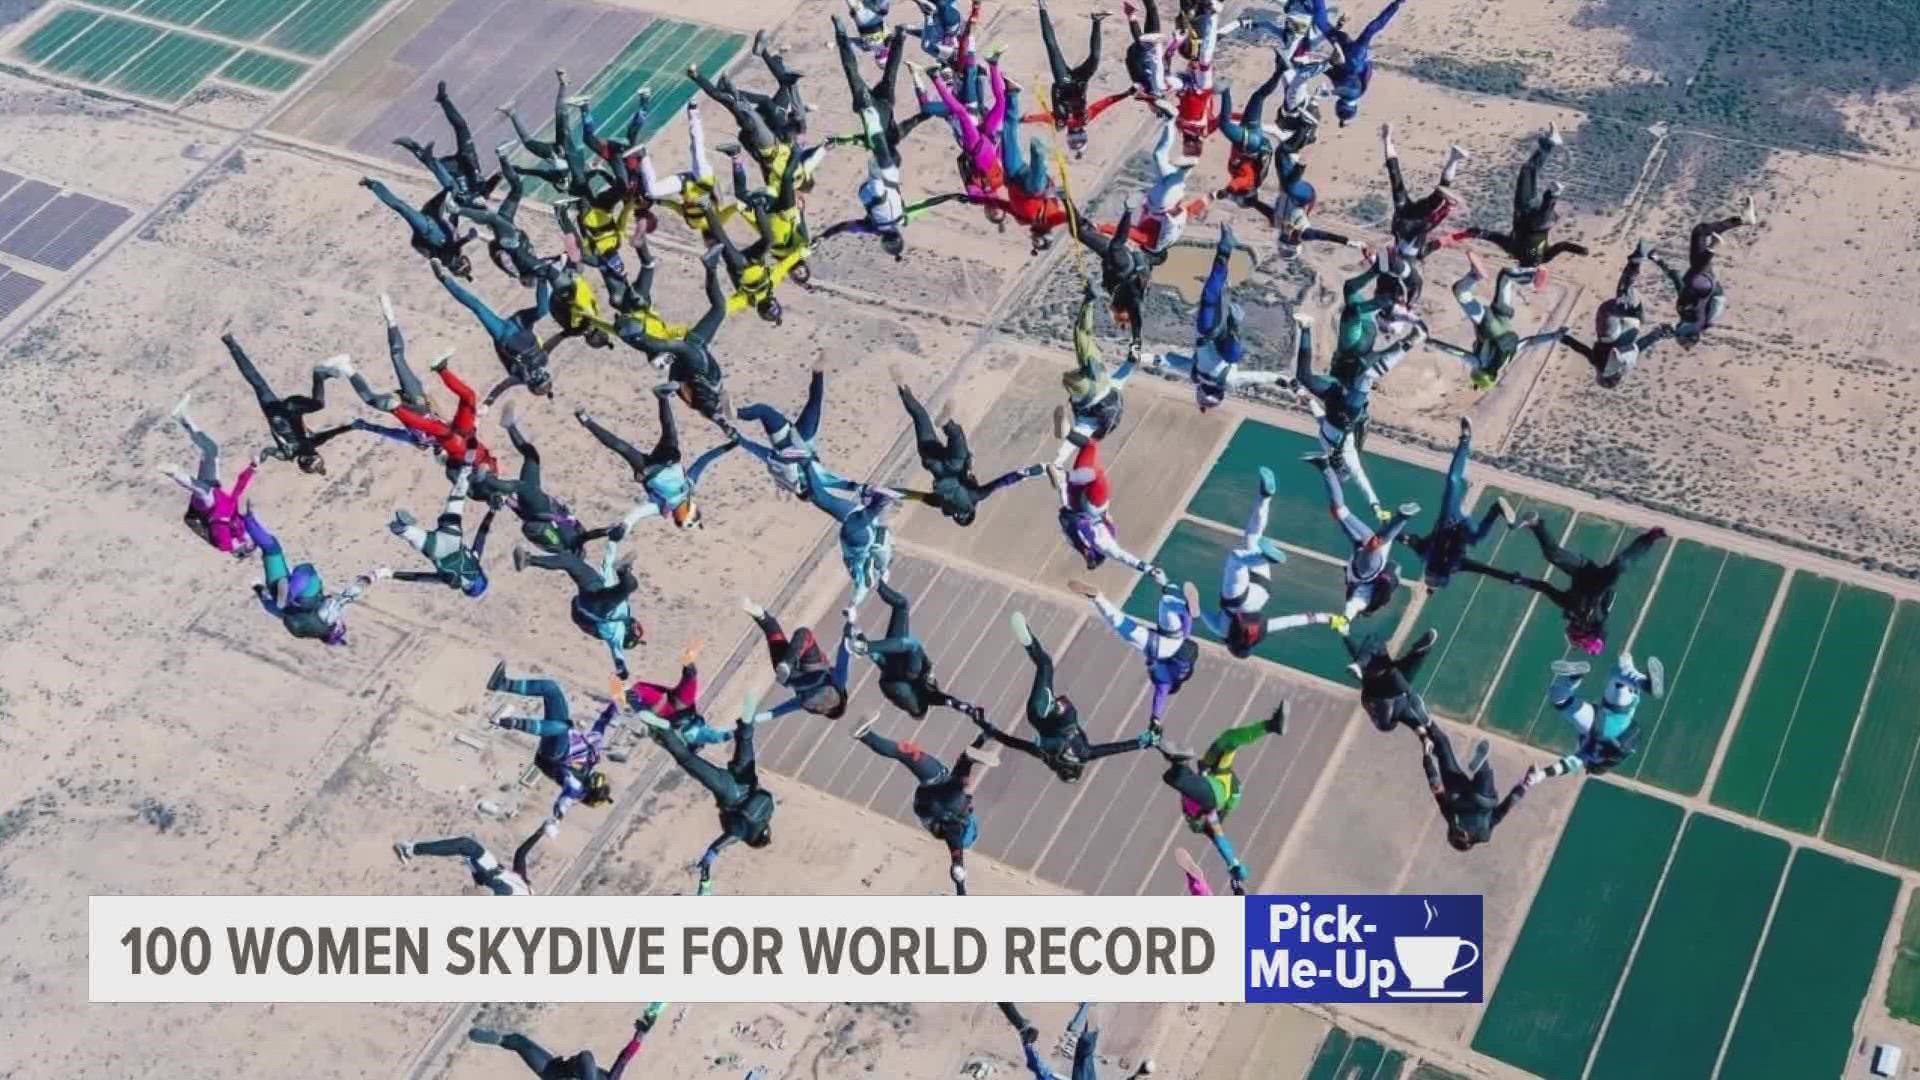 On their 20th skydive attempt, the group accomplished their mission: 80 women flying headfirst, linked together hand in hand, a new vertical women's world record.